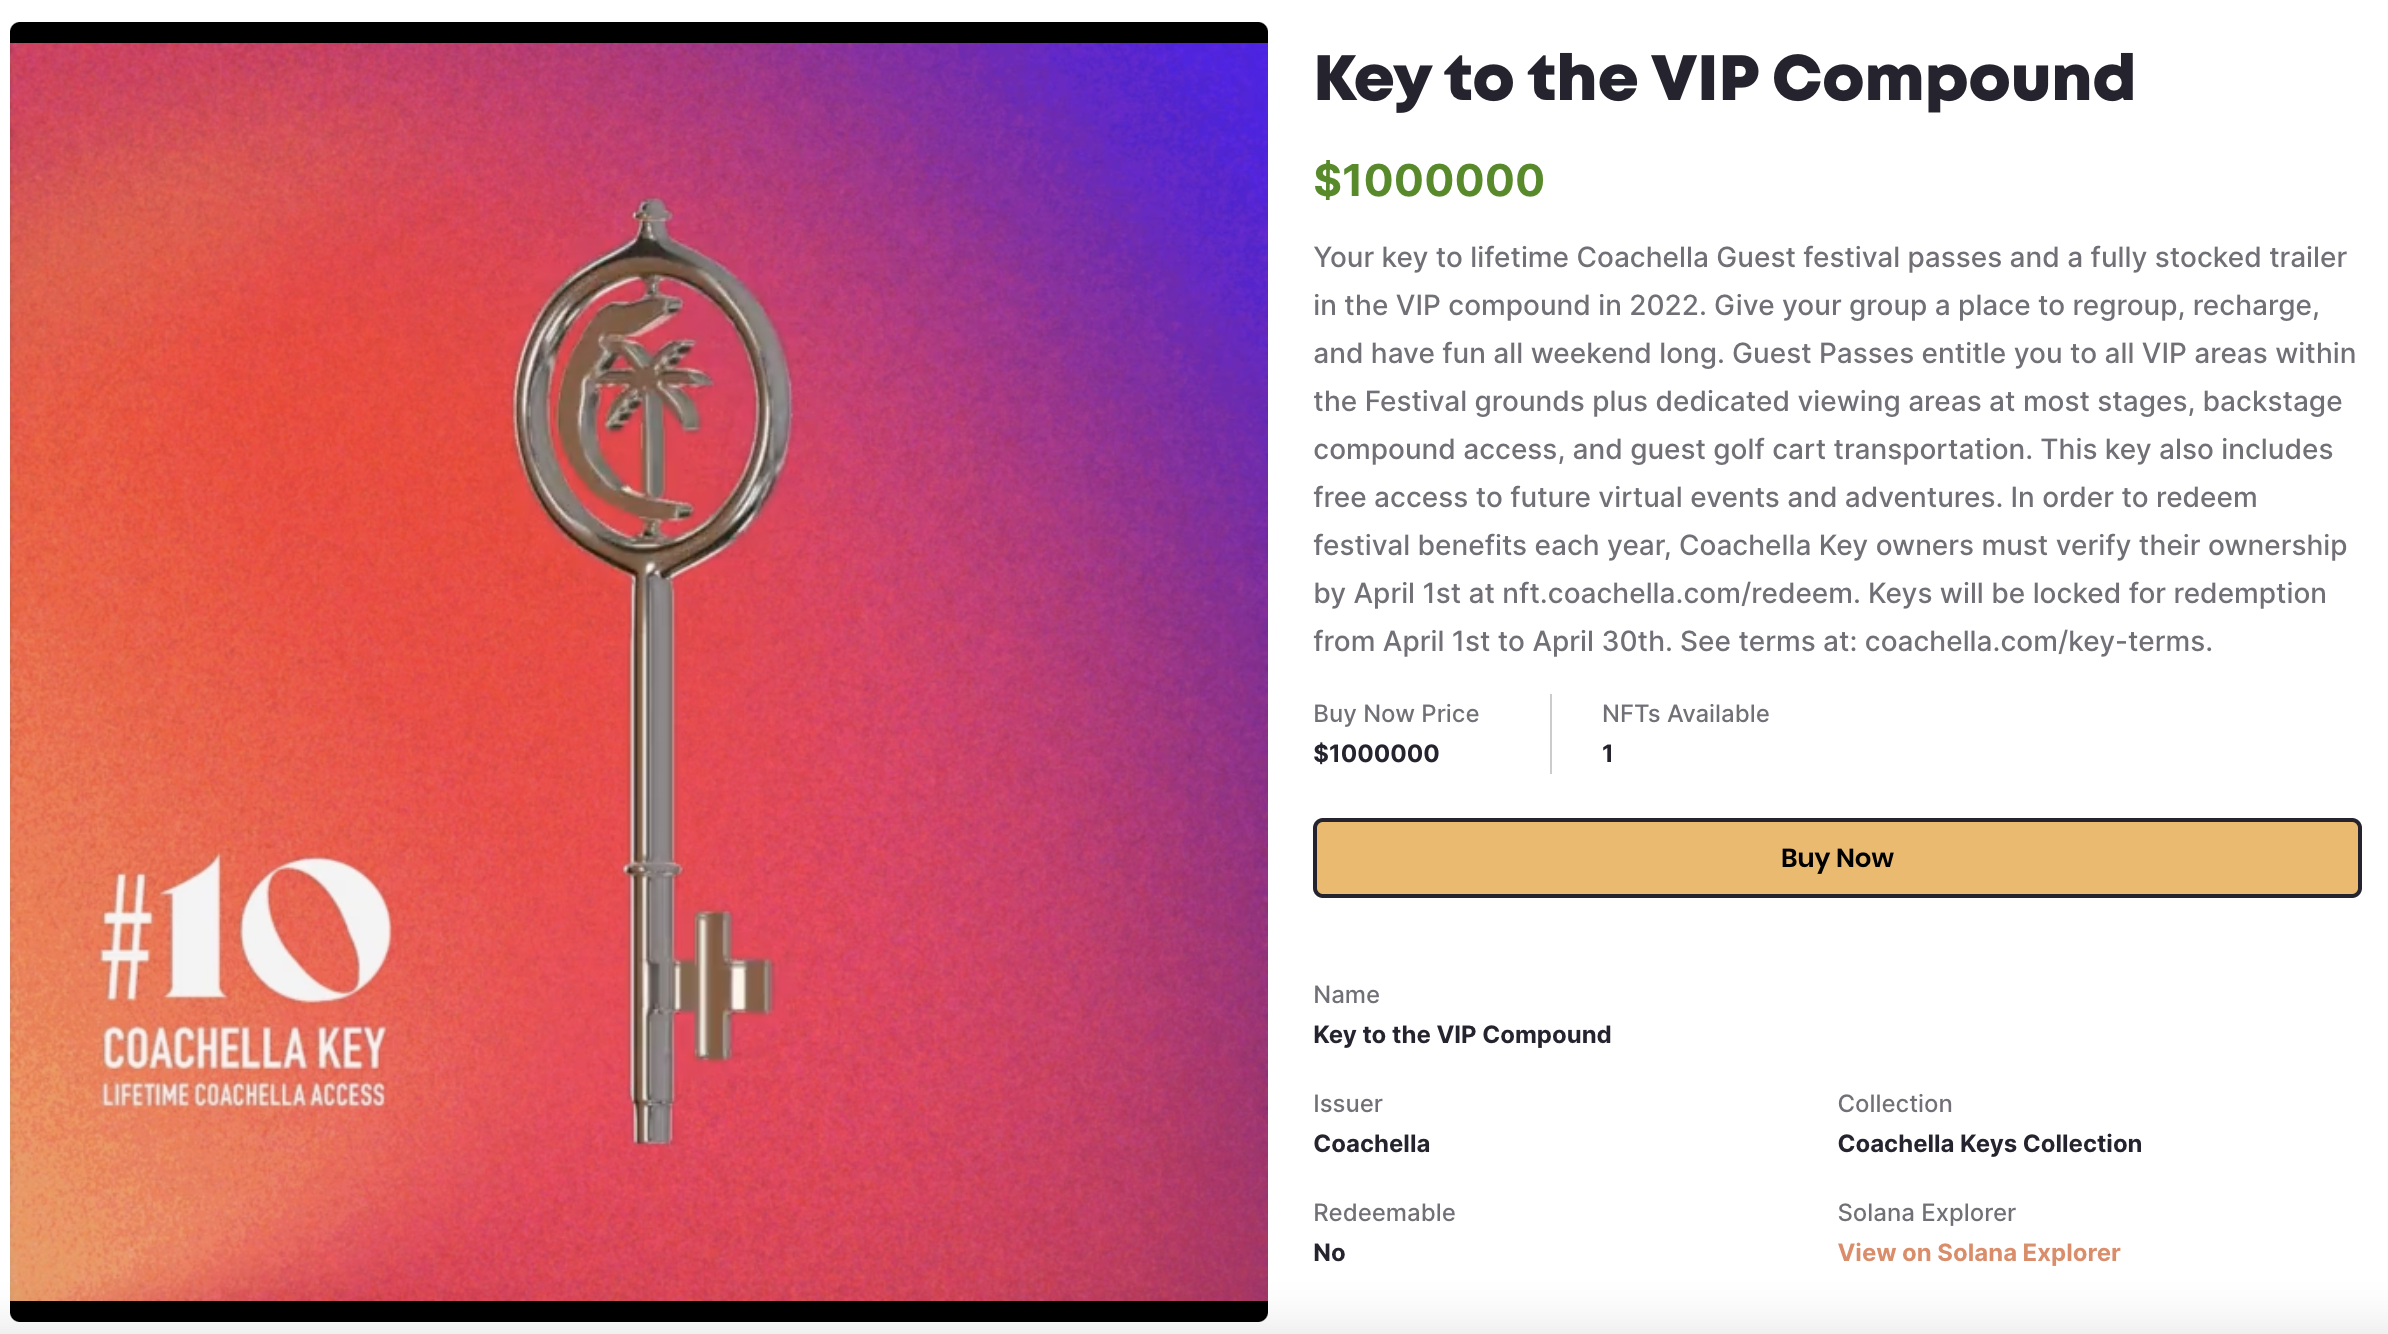 Coachella NFT that enables lifetime entry to all VIP events 